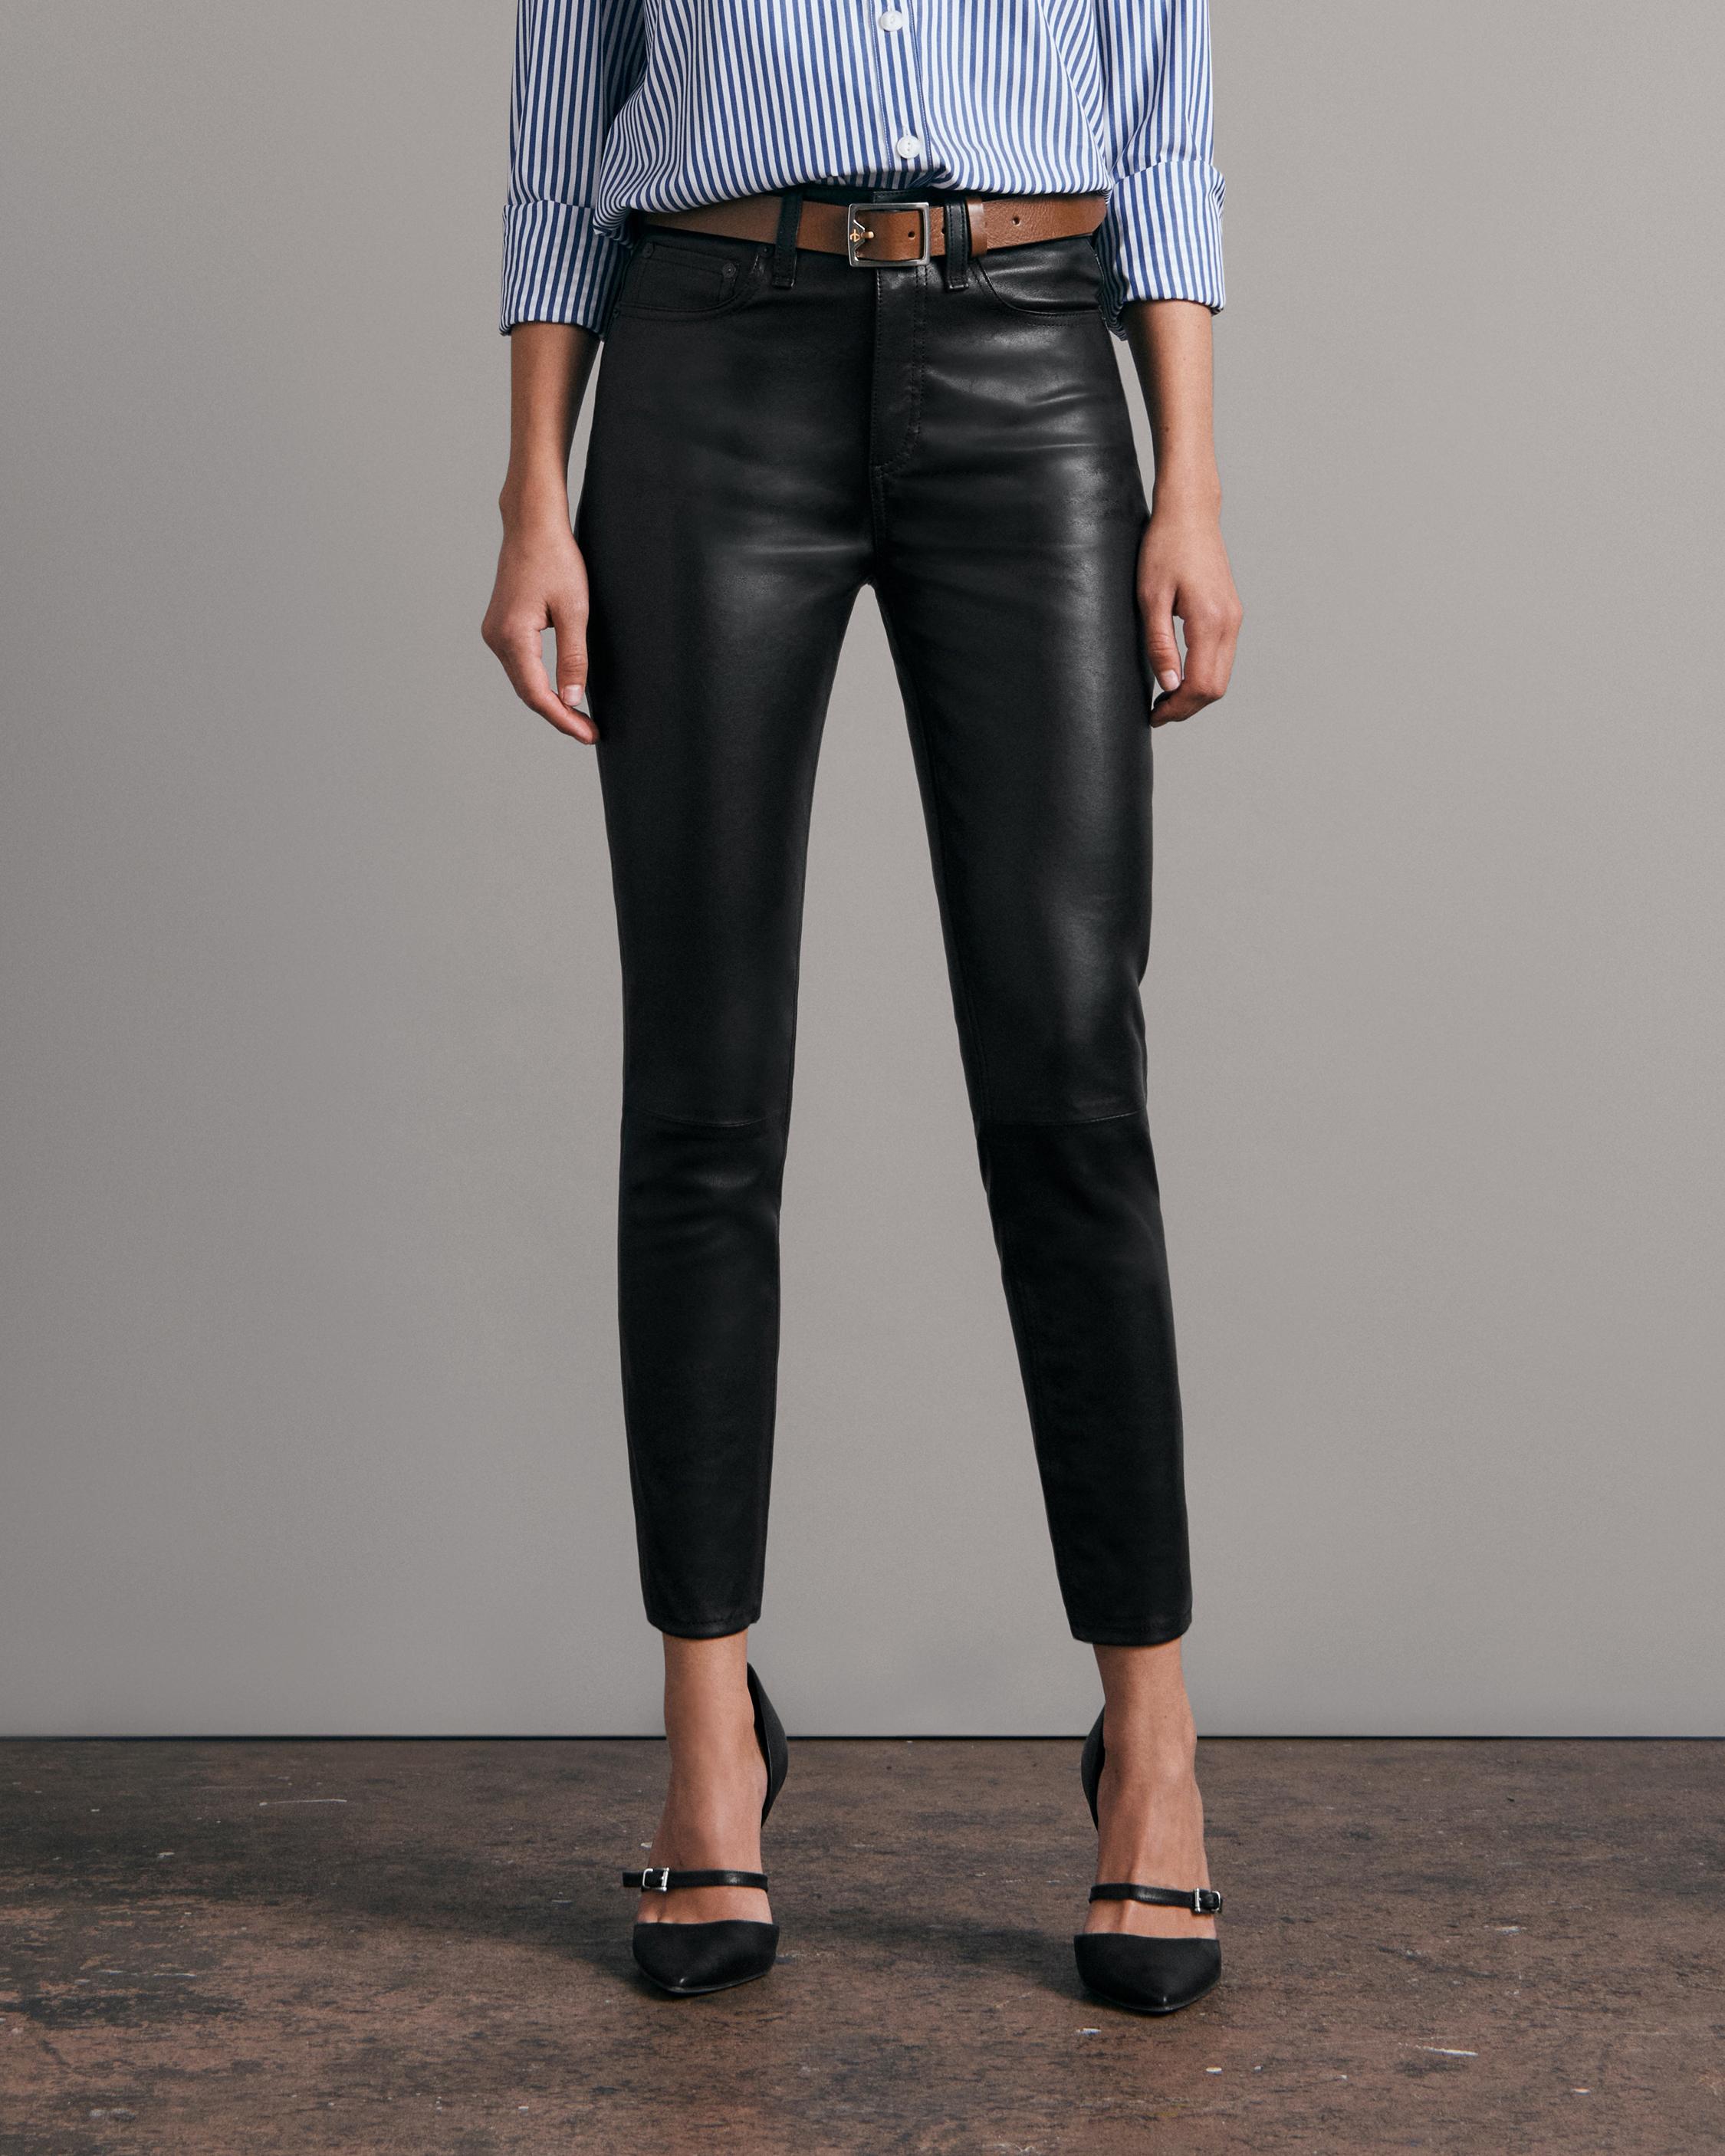 high waisted leather pants  Wide leg cropped pants, High waisted pants,  Belted pants